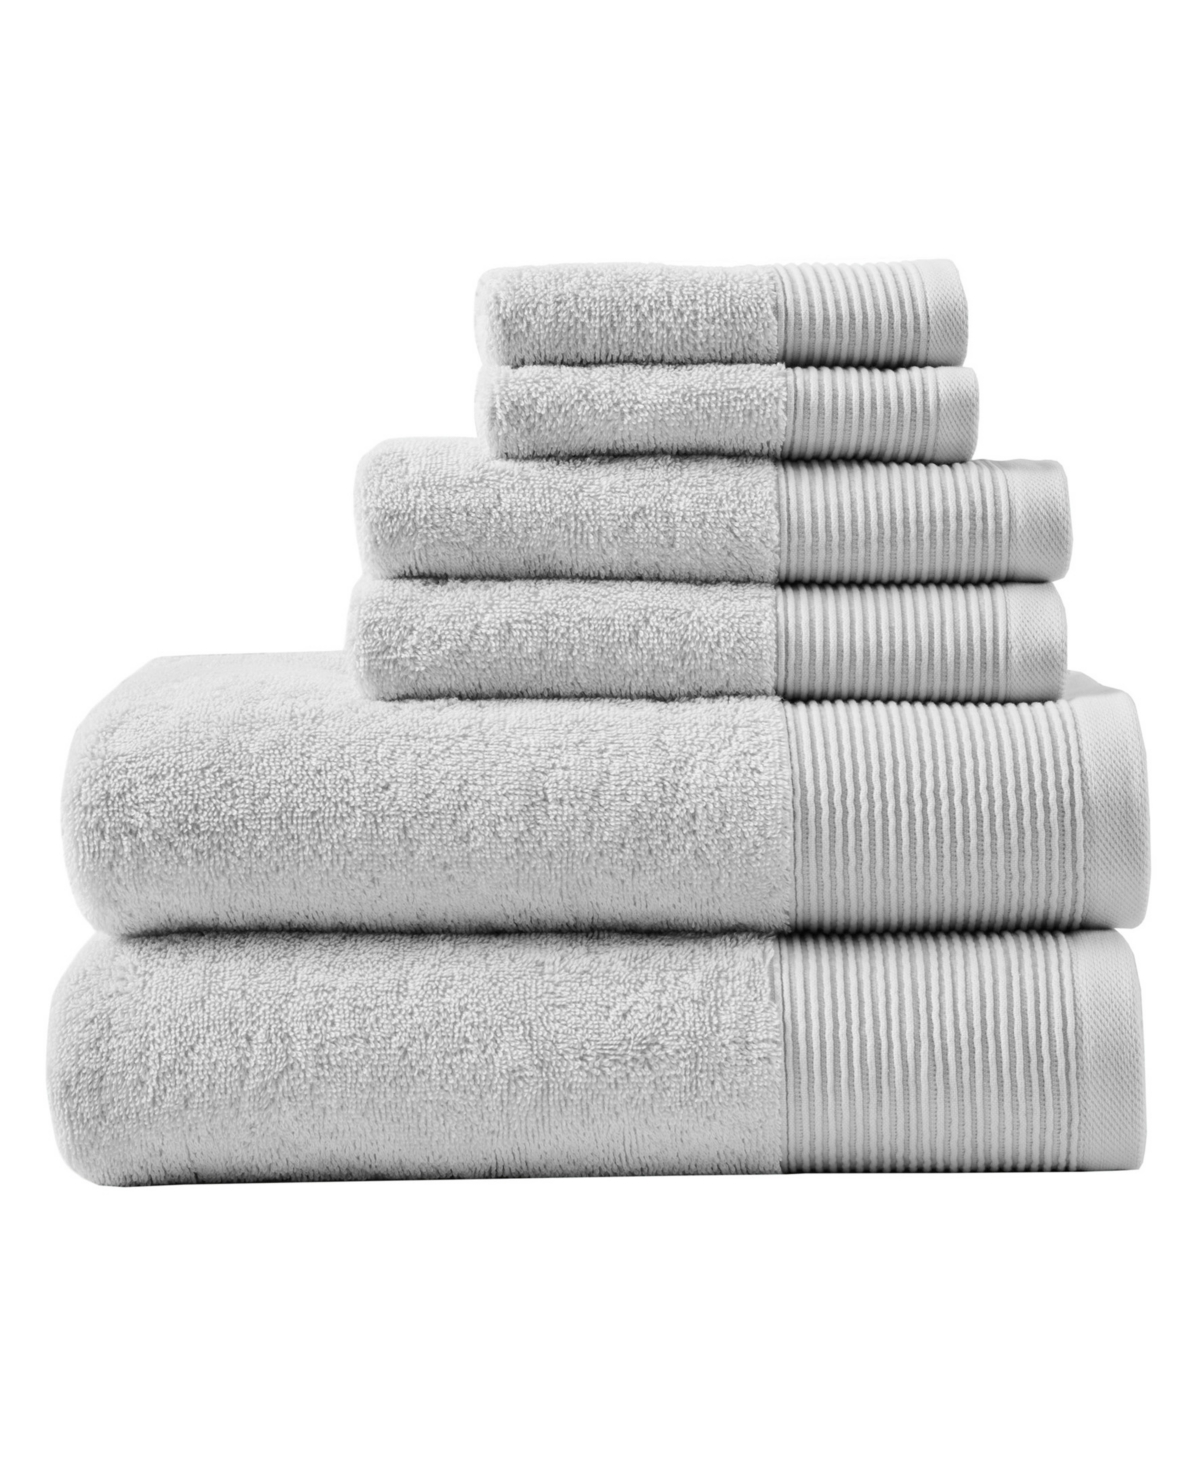 Beautyrest Nuage Cotton Tencel Blend Antimicrobial 6 Piece Towel Set Bedding In Gray